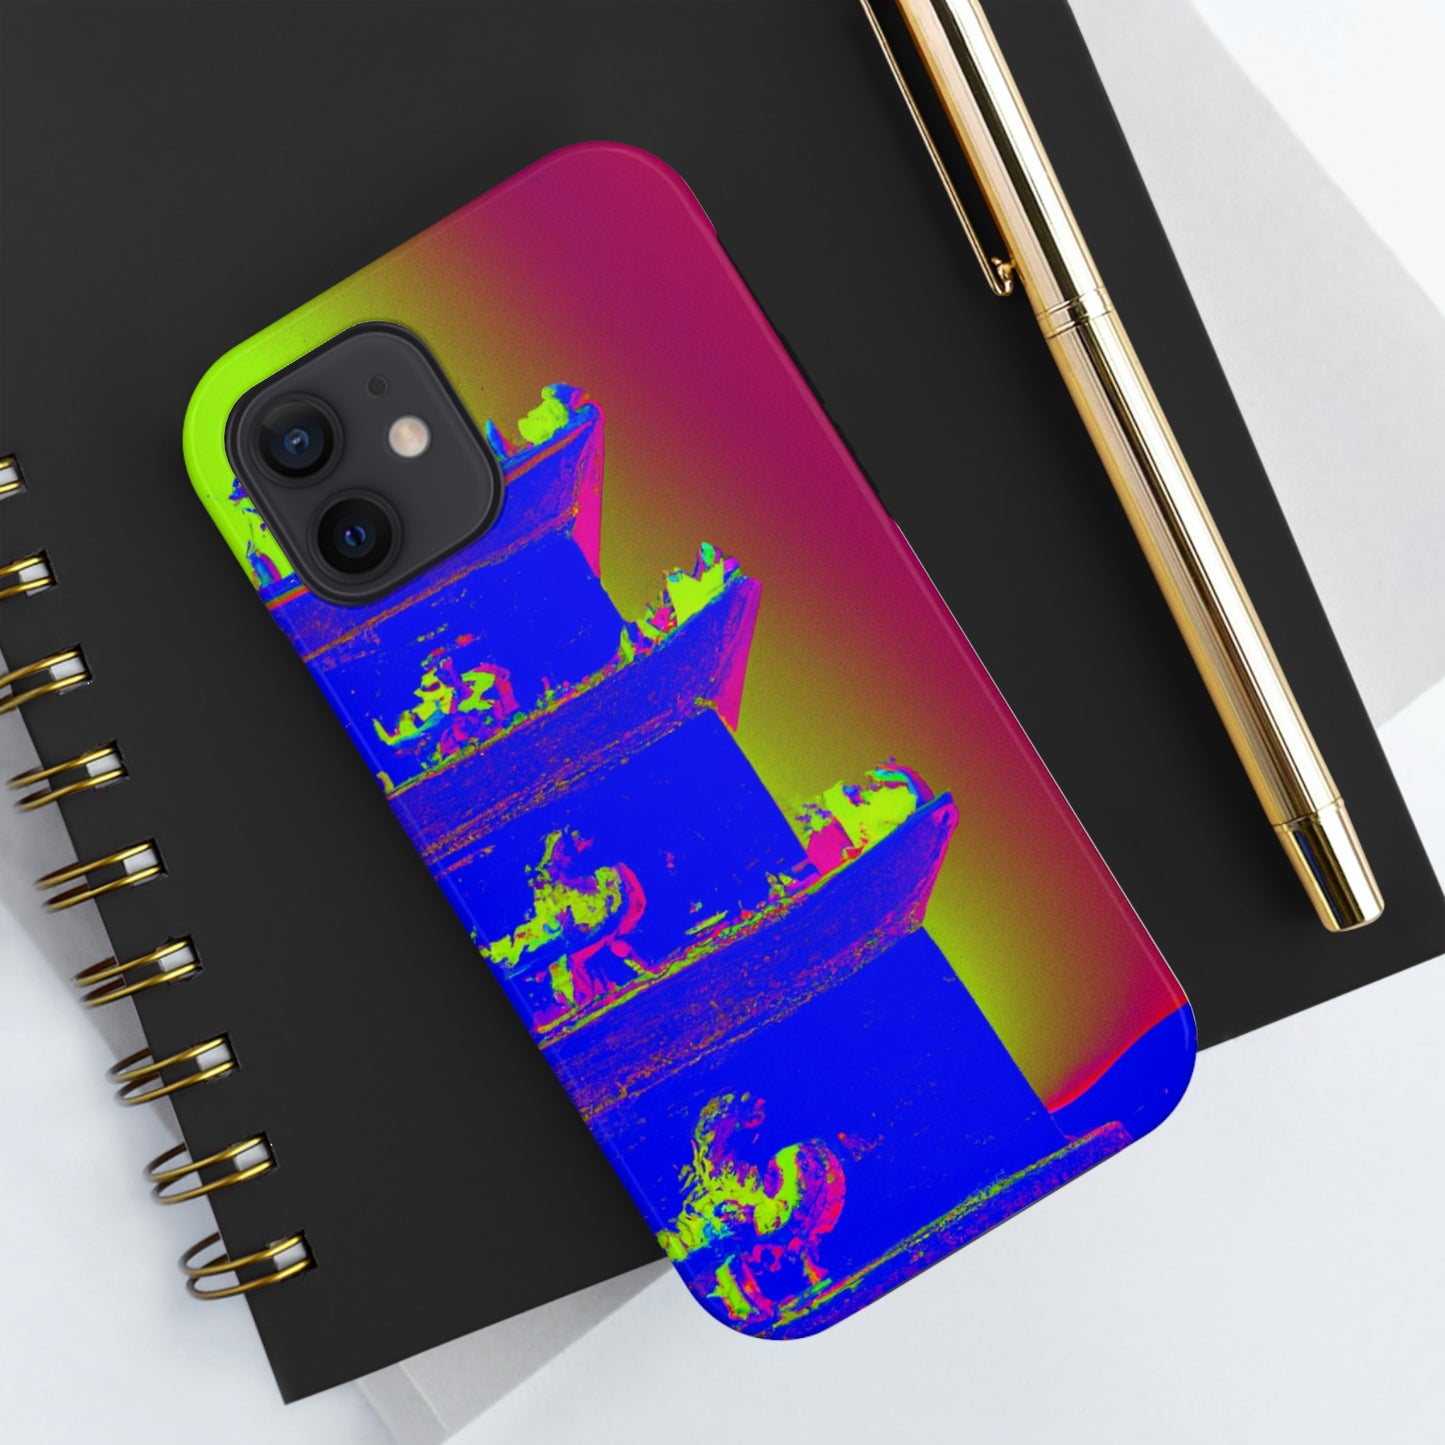 "The Ruins of Ancient Glory" - The Alien Tough Phone Cases